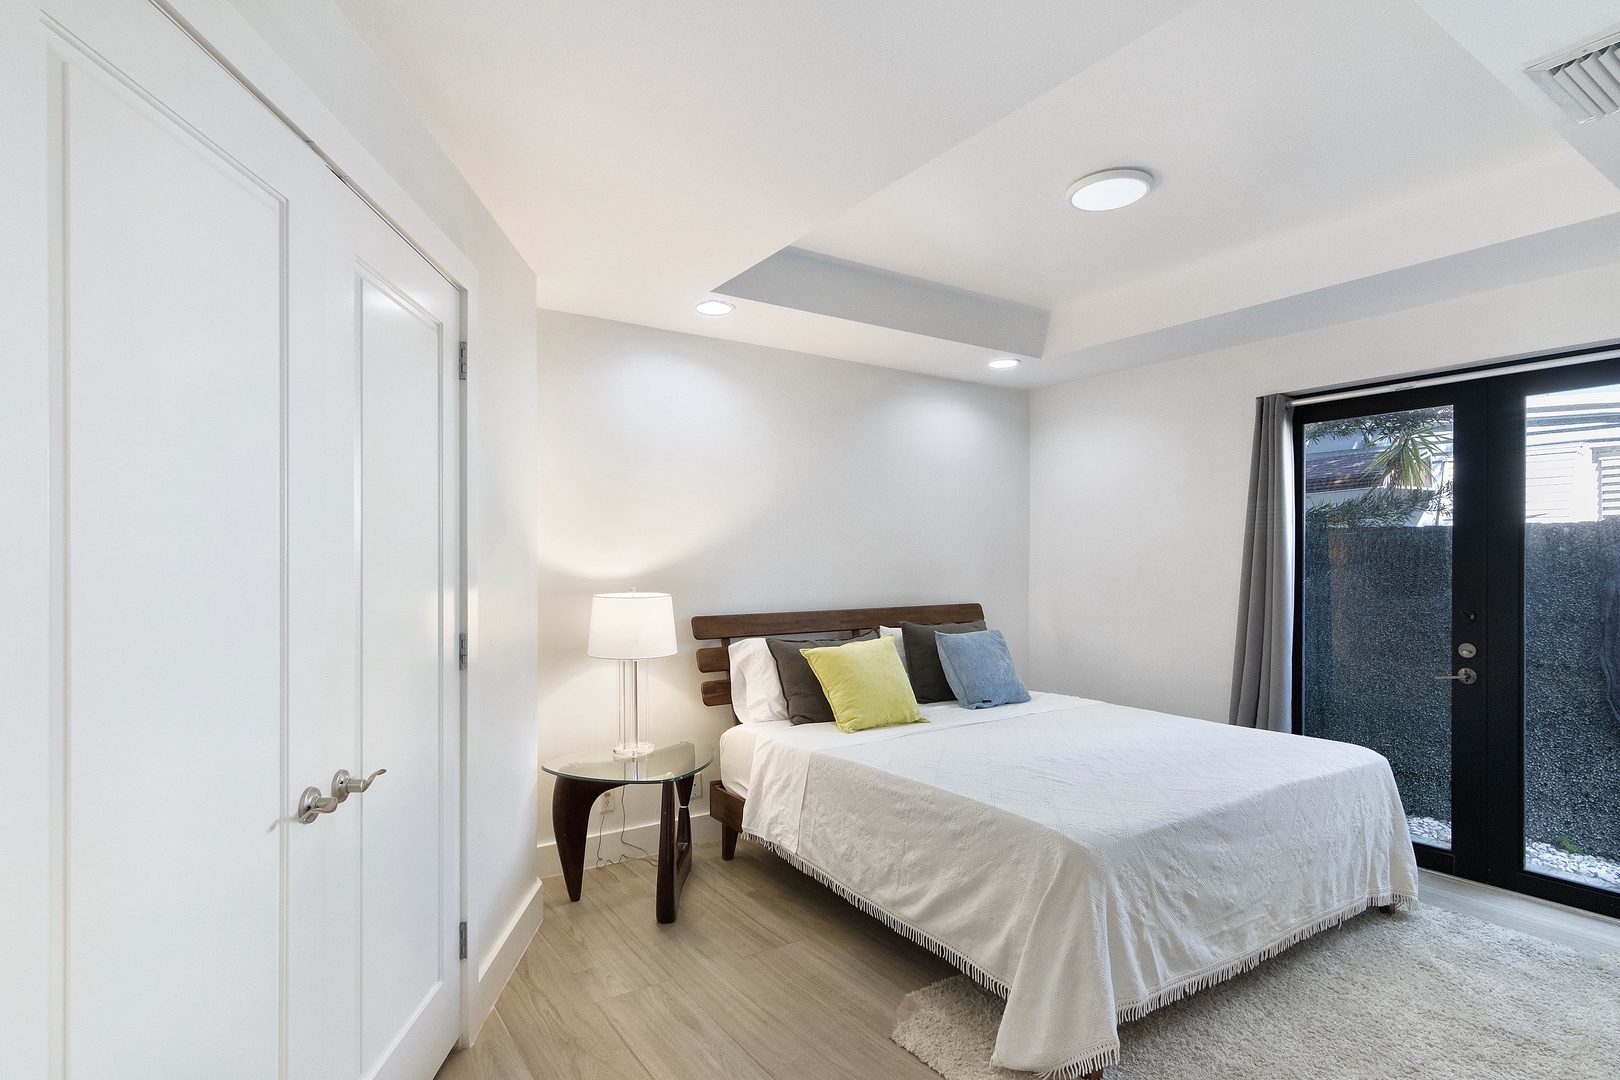 This polished 1st-floor queen suite includes a private ensuite & patio access